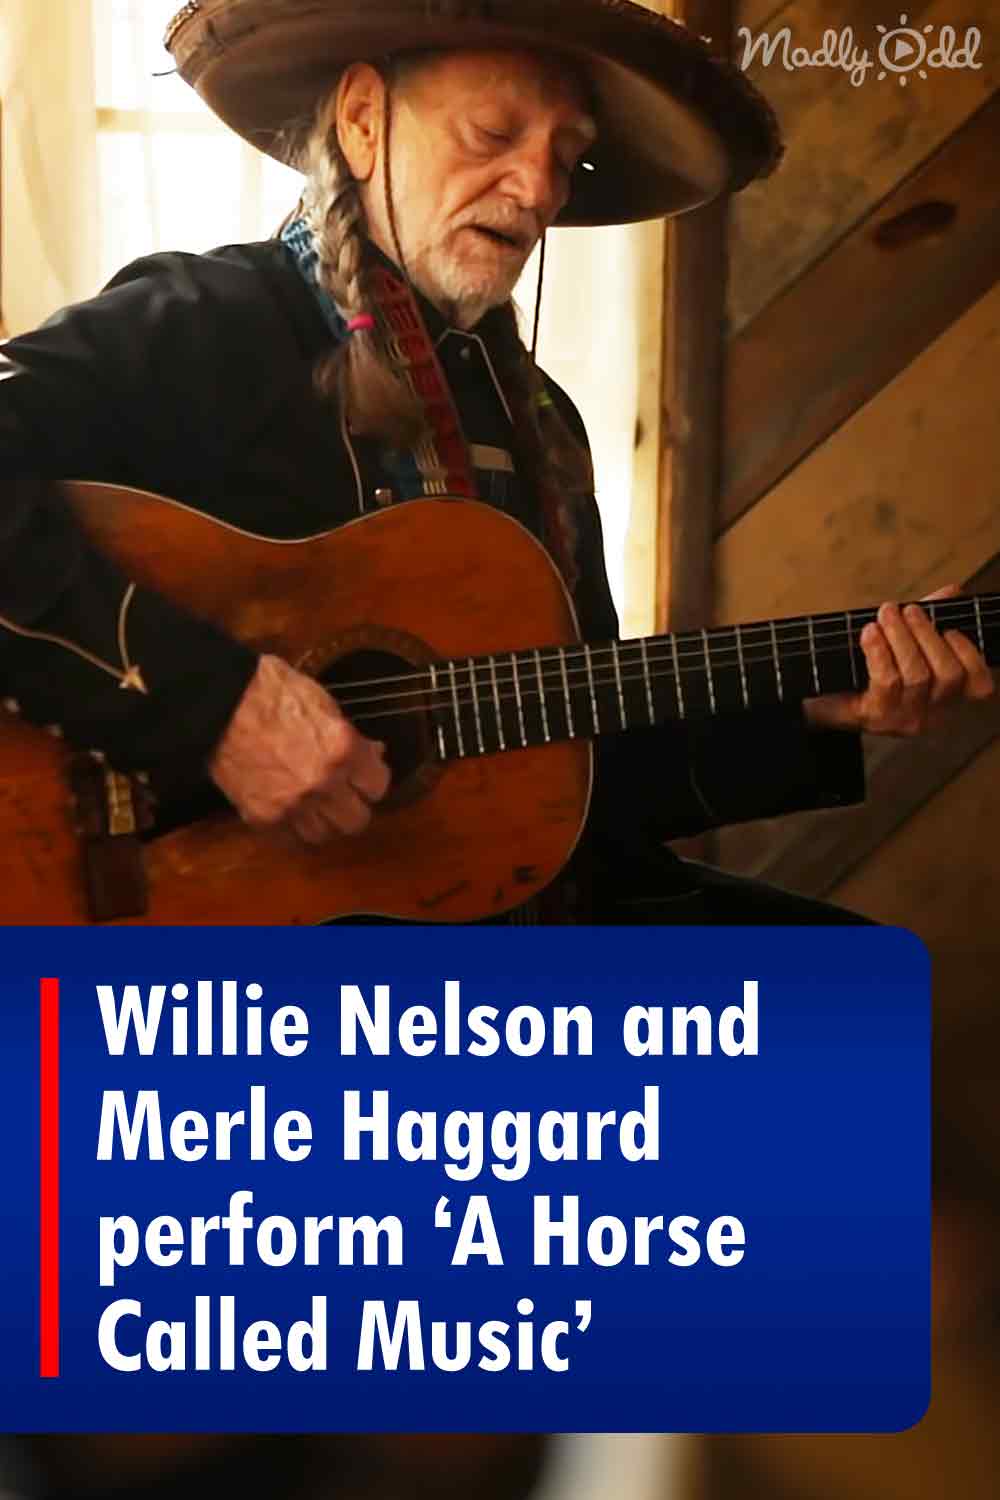 Willie Nelson and Merle Haggard perform ‘A Horse Called Music’